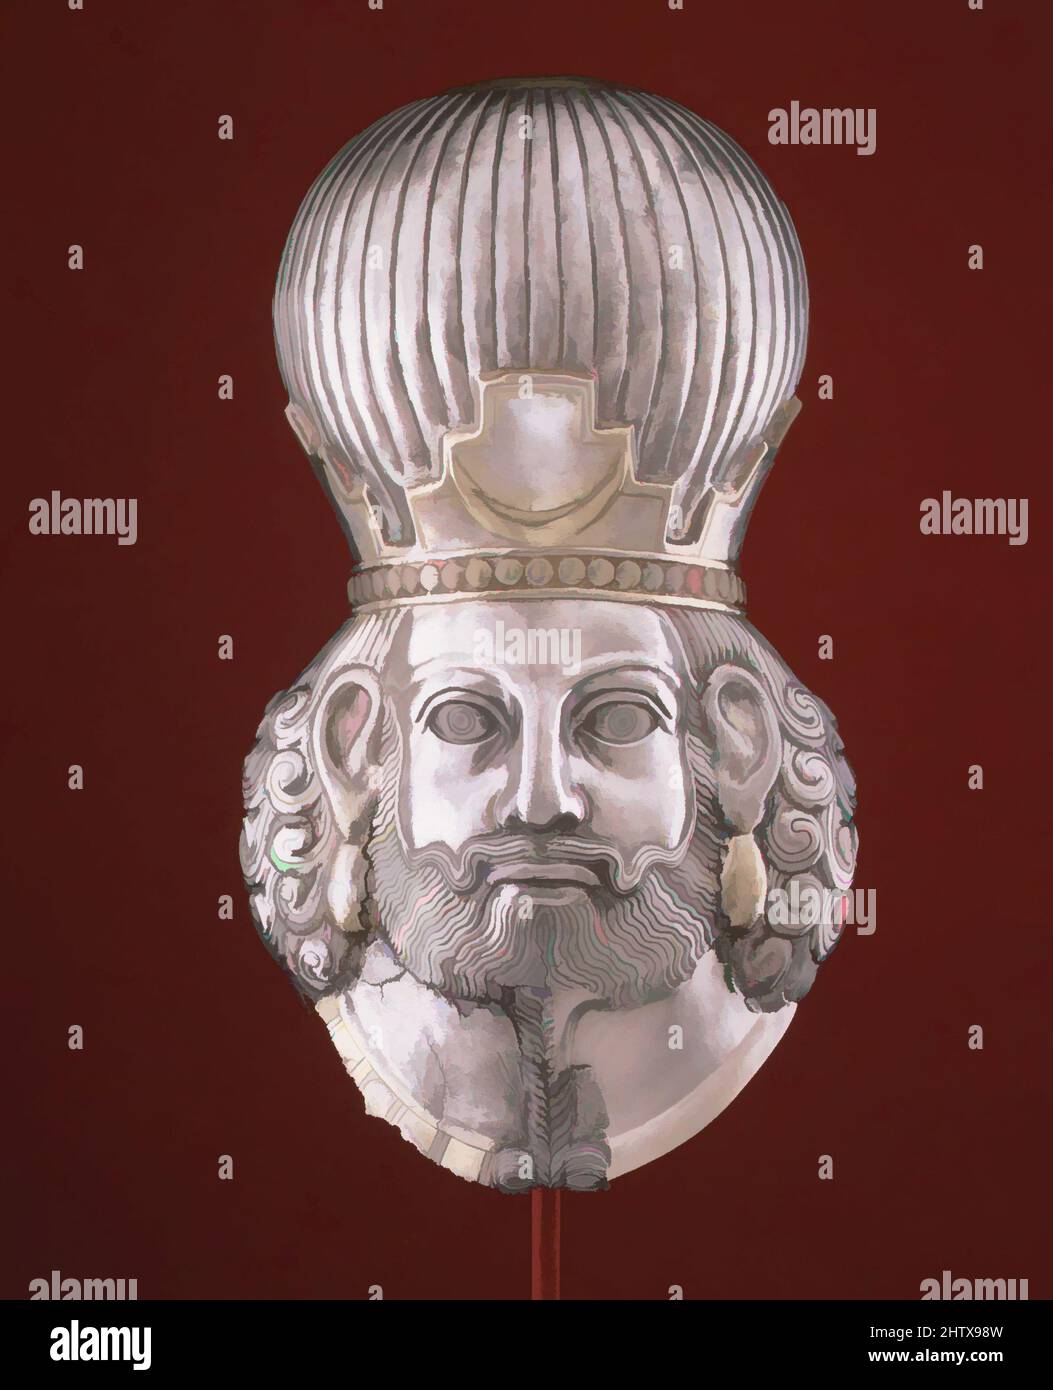 Art inspired by Head of a king, Sasanian, ca. 4th century, Iran, Sasanian, Silver, mercury gilding, 15 3/4 x 9 x 7 7/8 in. (40 x 22.9 x 20 cm), Metalwork-Sculpture, The Sasanian dynasty of Iran ruled an area from the Euphrates River to Bactria from the third century A.D. until the, Classic works modernized by Artotop with a splash of modernity. Shapes, color and value, eye-catching visual impact on art. Emotions through freedom of artworks in a contemporary way. A timeless message pursuing a wildly creative new direction. Artists turning to the digital medium and creating the Artotop NFT Stock Photo